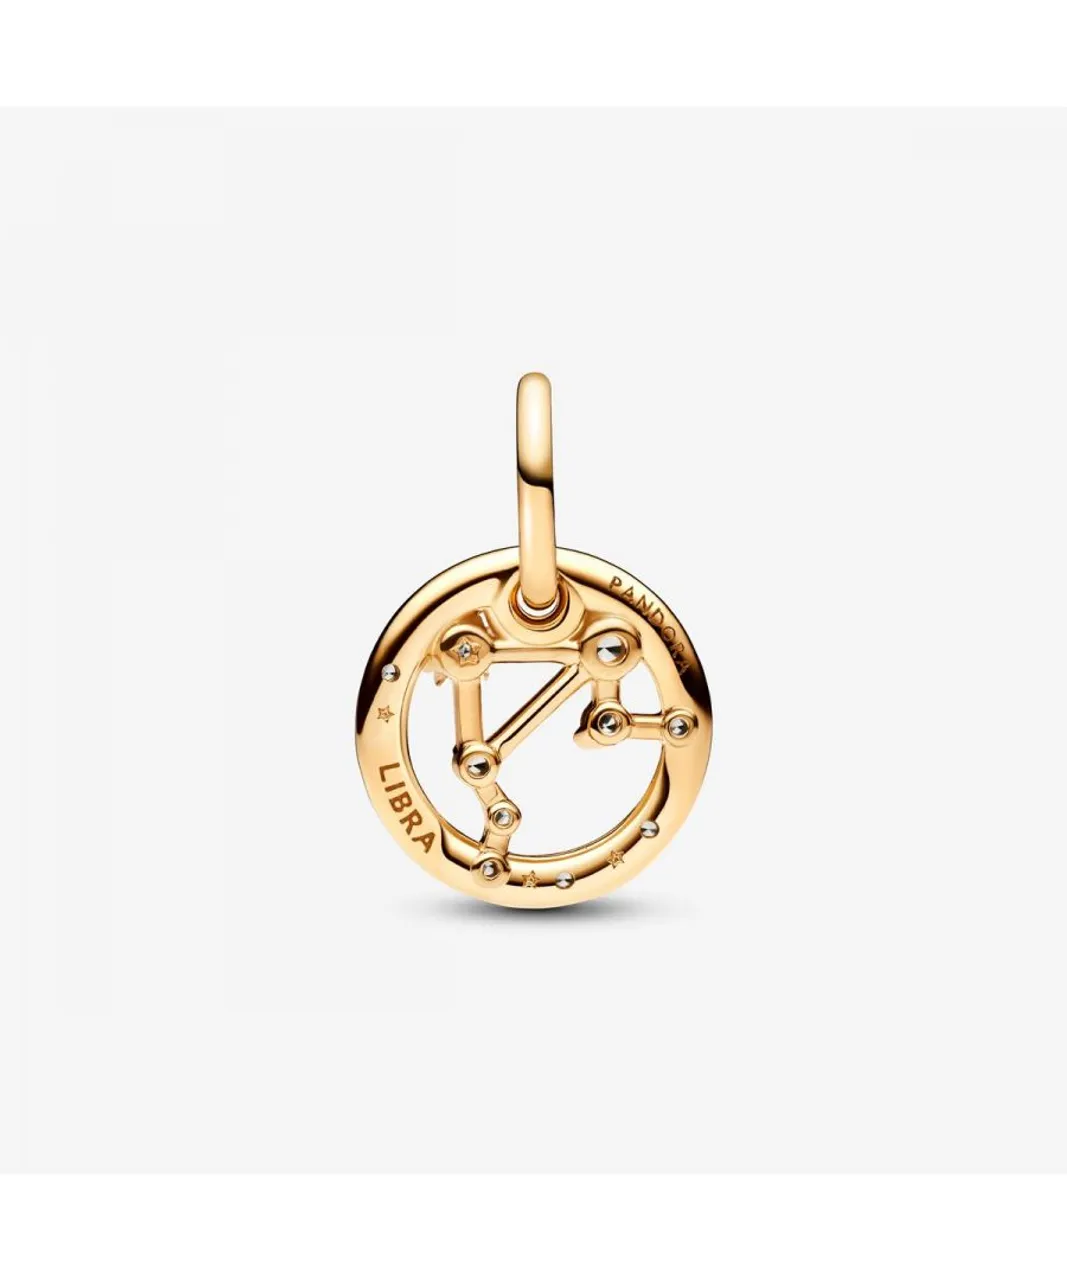 Pandora 'Zodiac Sign' WoMens Gold Plated Metal Charm - 762712C01 Gold Tone - One Size